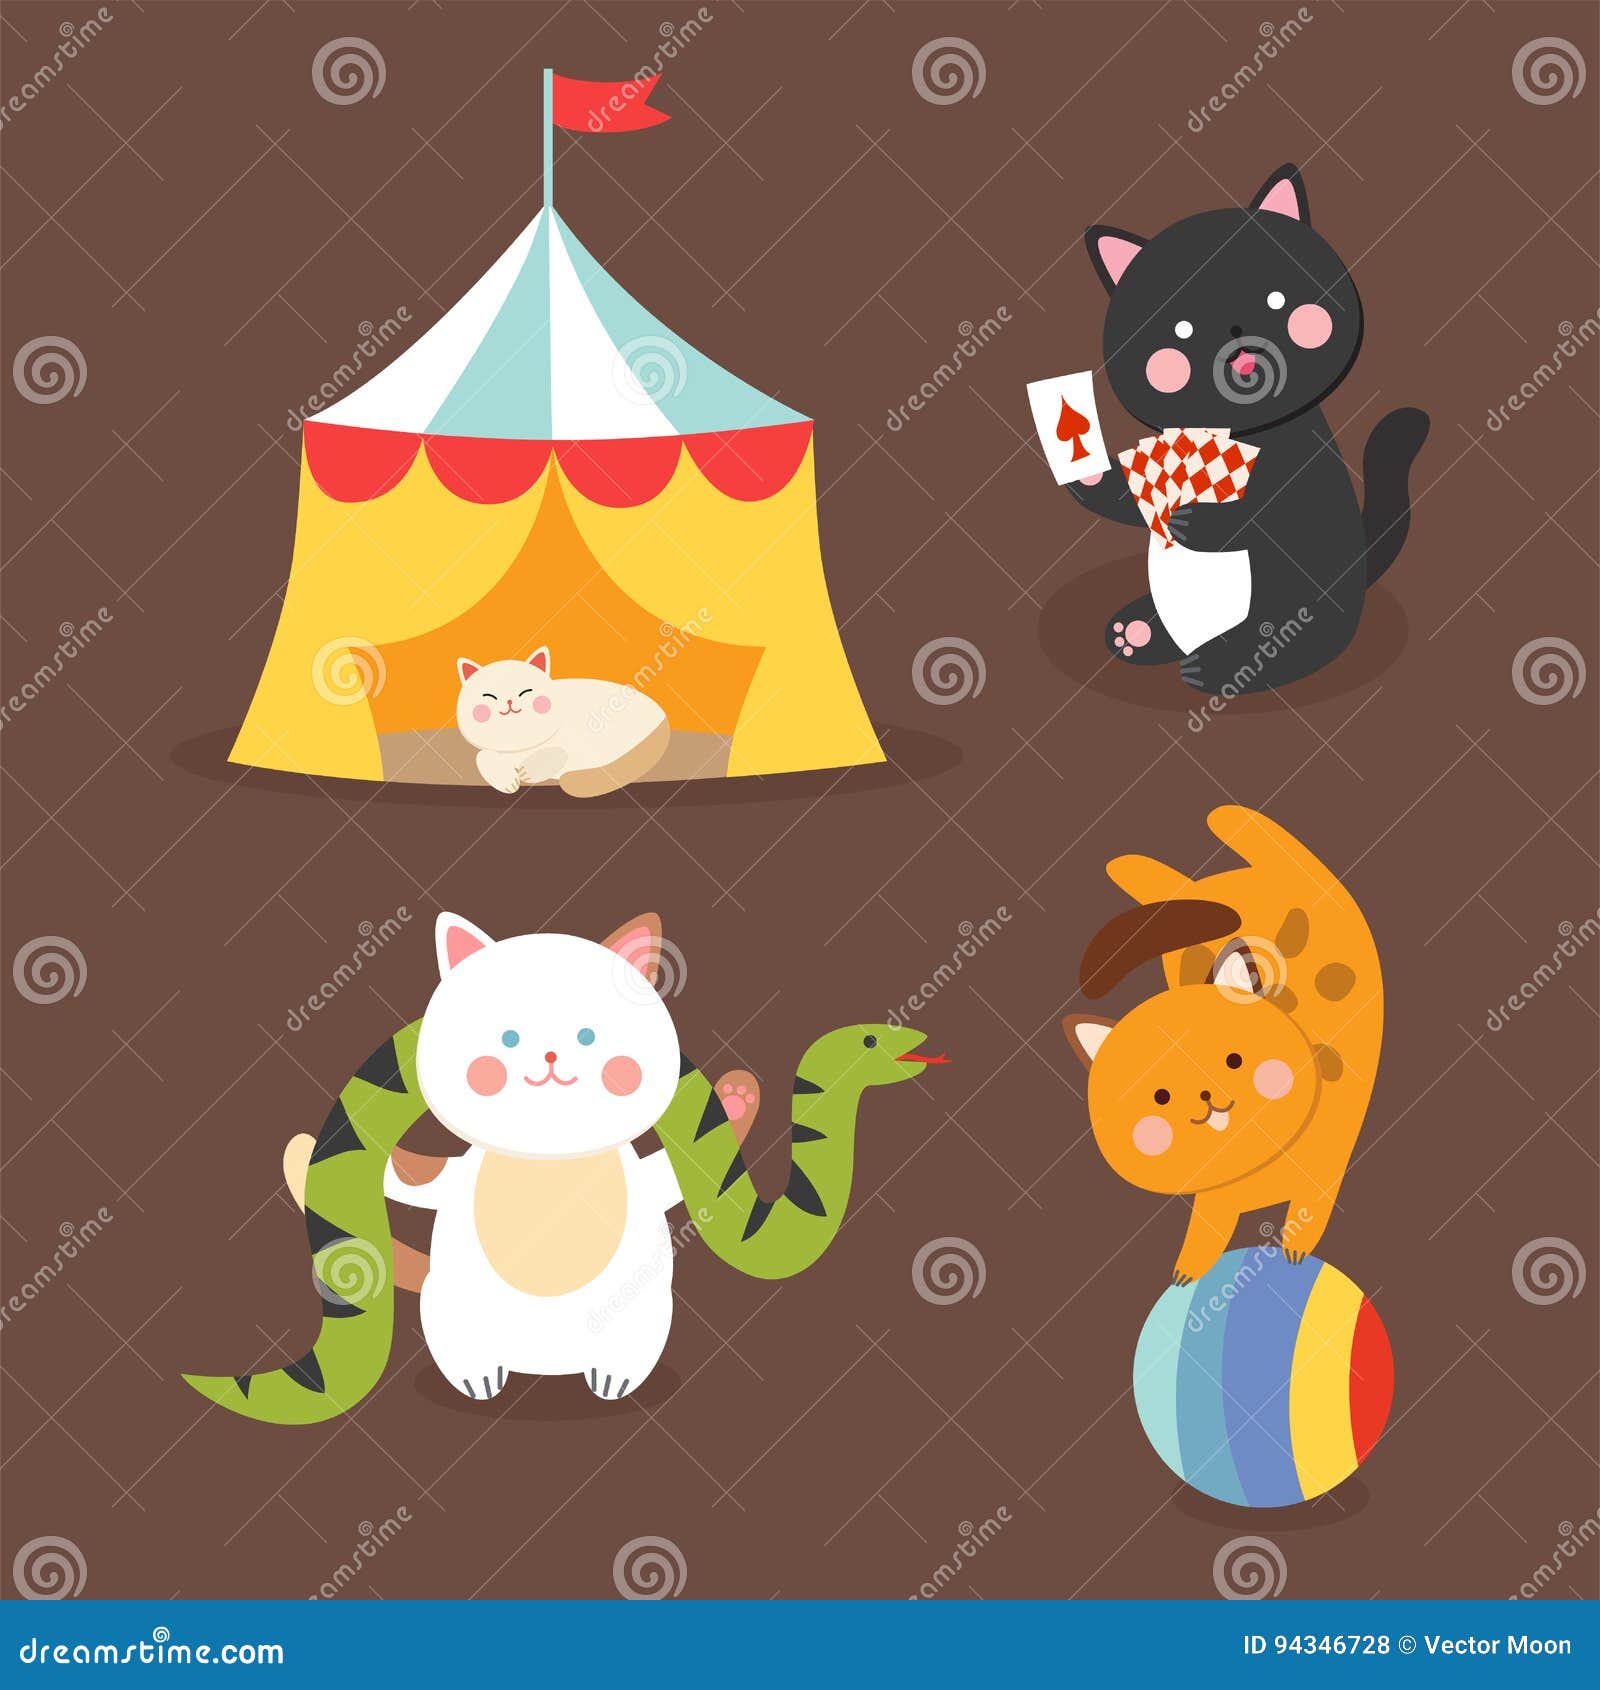 Circus Cats Vector Cheerful Illustration For Kids With Little Domestic ...